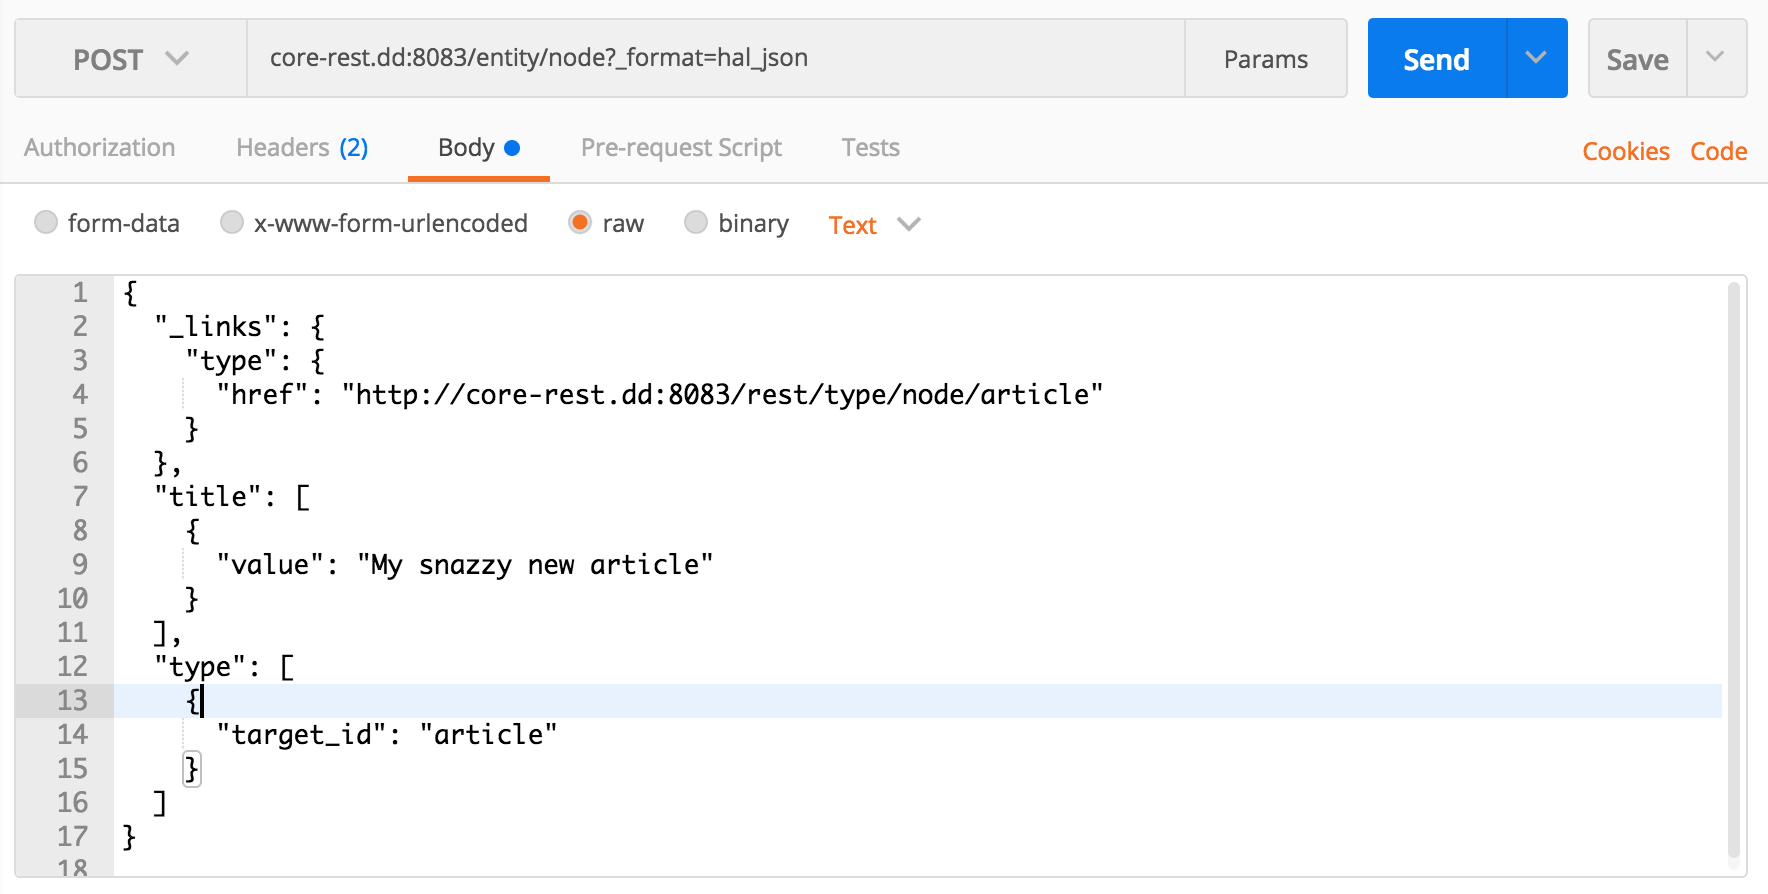 Issuing a POST request with Postman